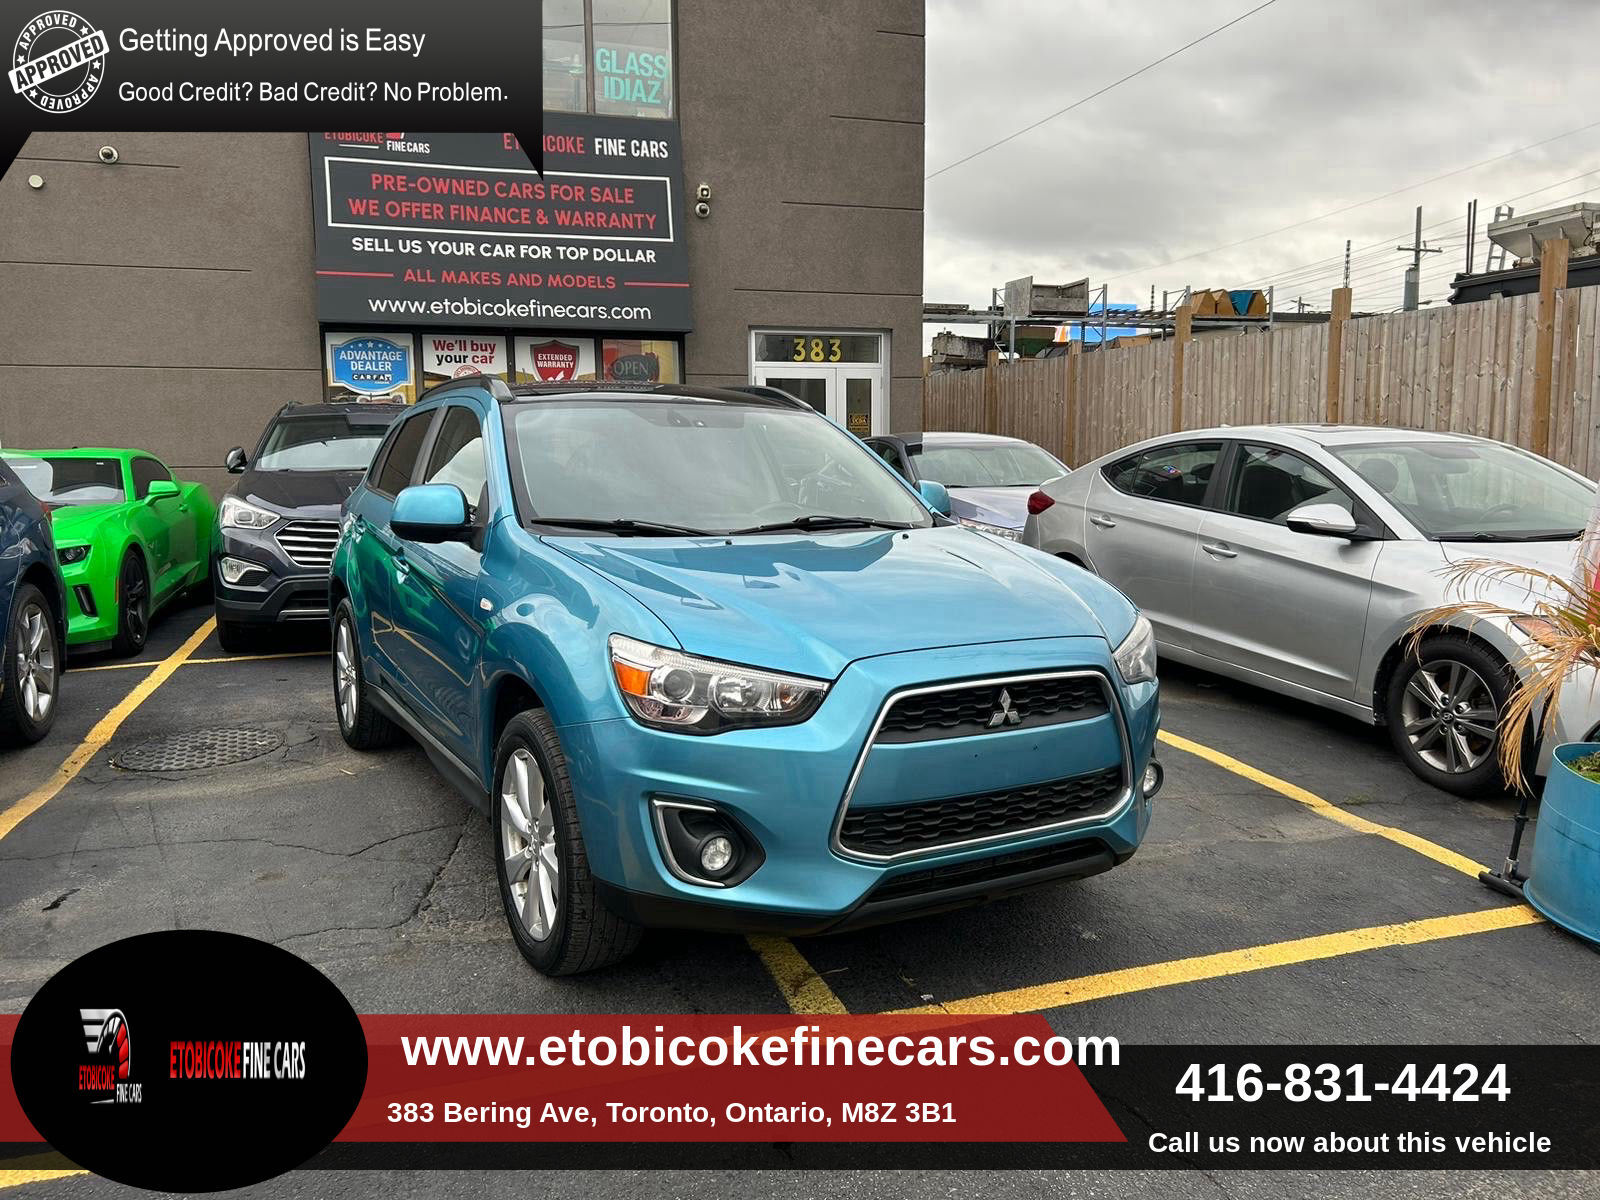 2013 Mitsubishi RVR AWD 4dr CVT GT FULLY CERTIFIED WITH FREE WARRANTY